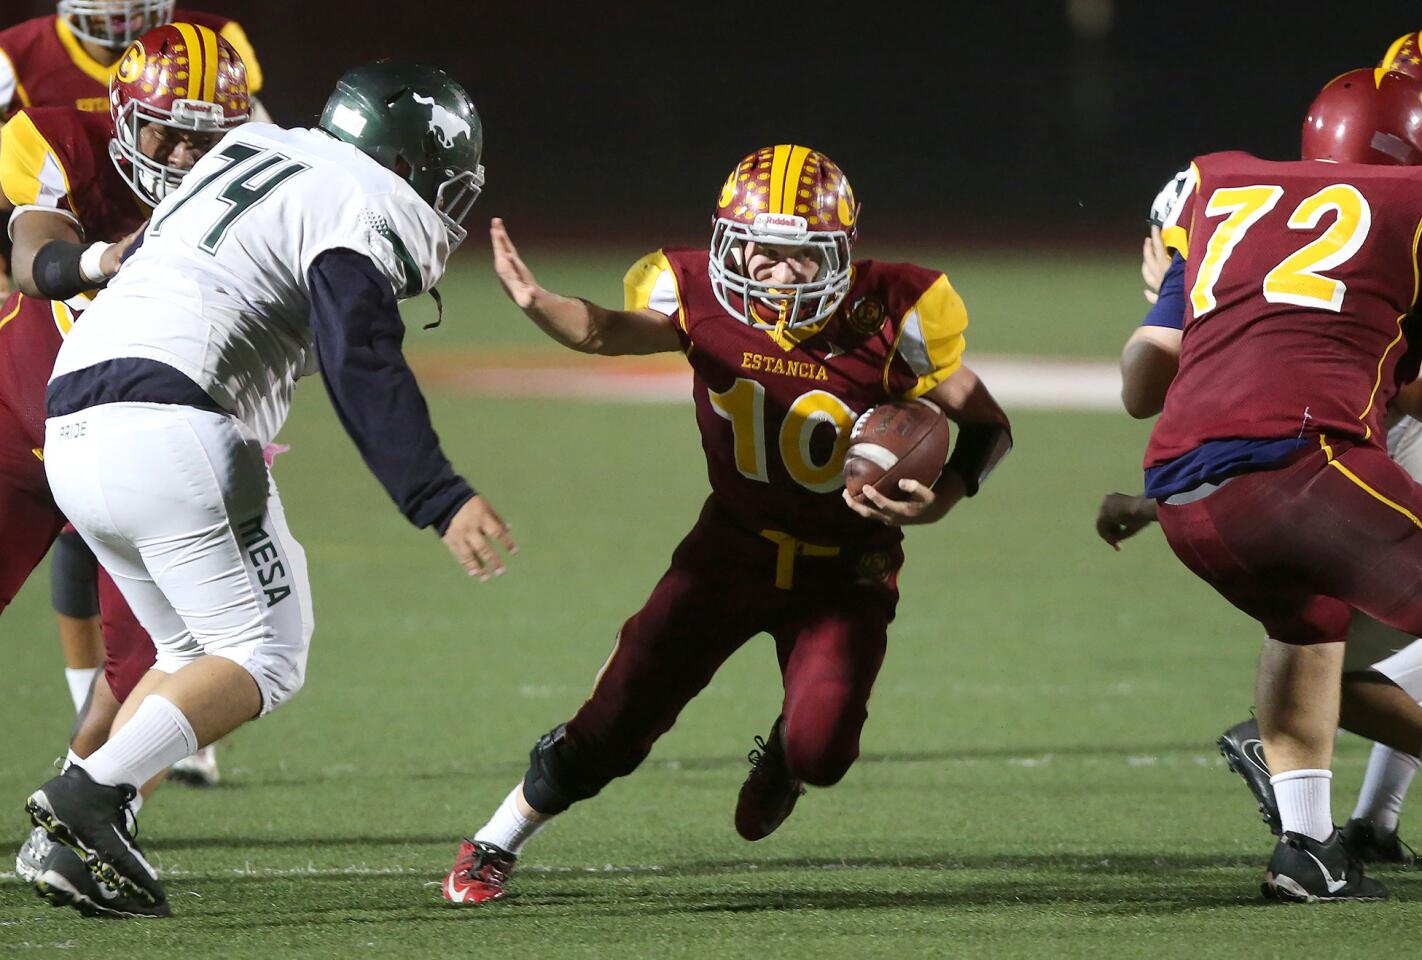 Estancia High's Trevor Pacheco runs through a hole en route to a touchdown in the second quarter of the Battle for the Bell game against rival Costa Mesa at Jim Scott Stadium on Friday.